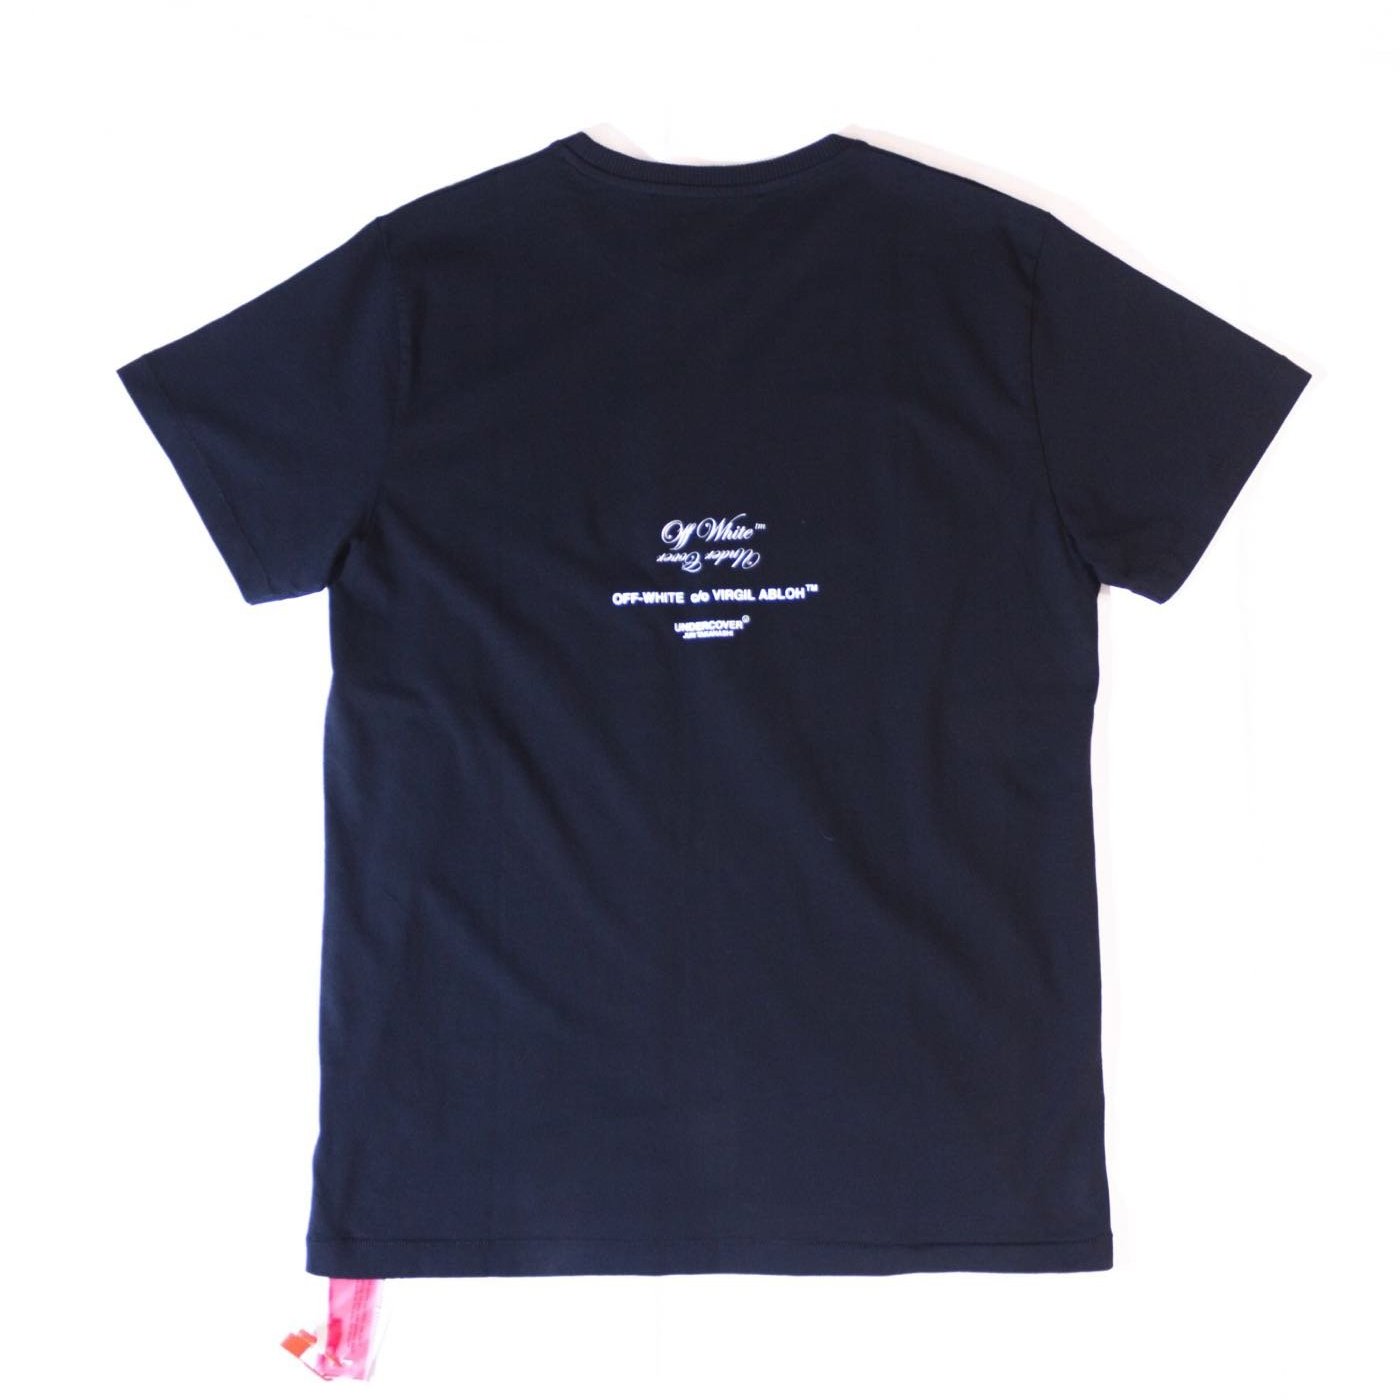 OFF - White x Undercover Apple s/s T-Shirt. OW UC 蘋果短袖| Yahoo 